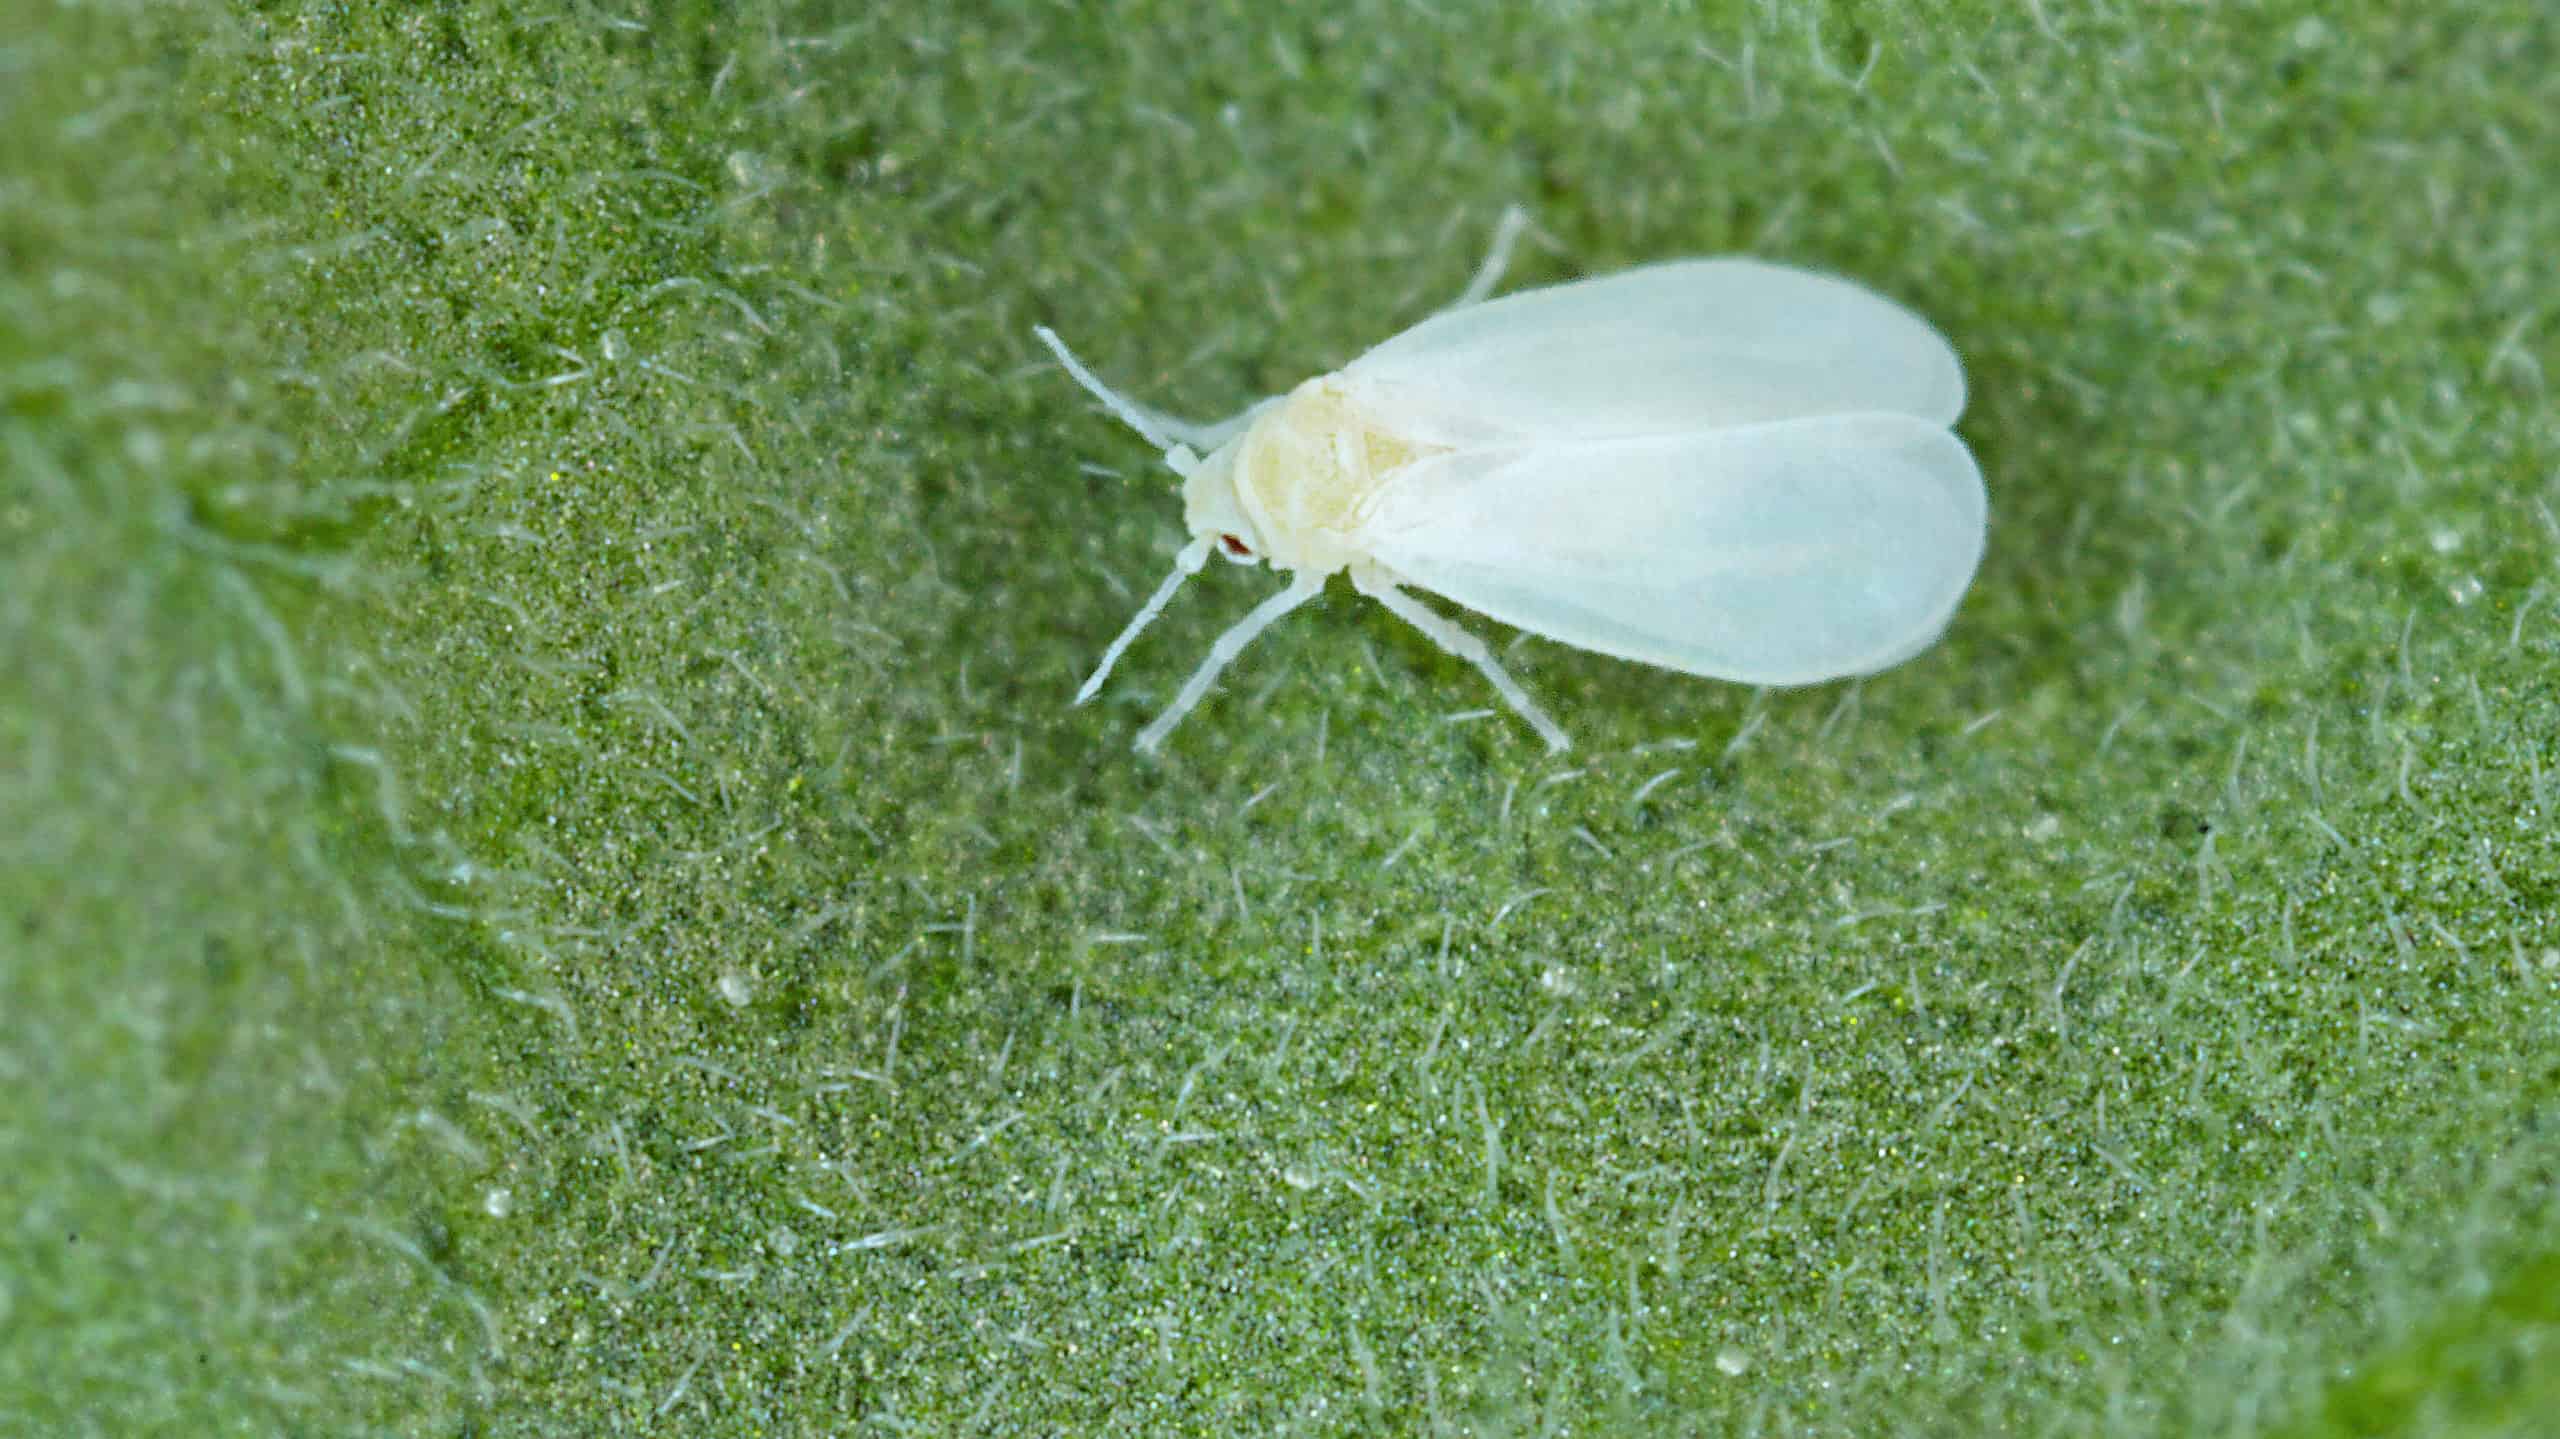 Whitefly on a green leaf